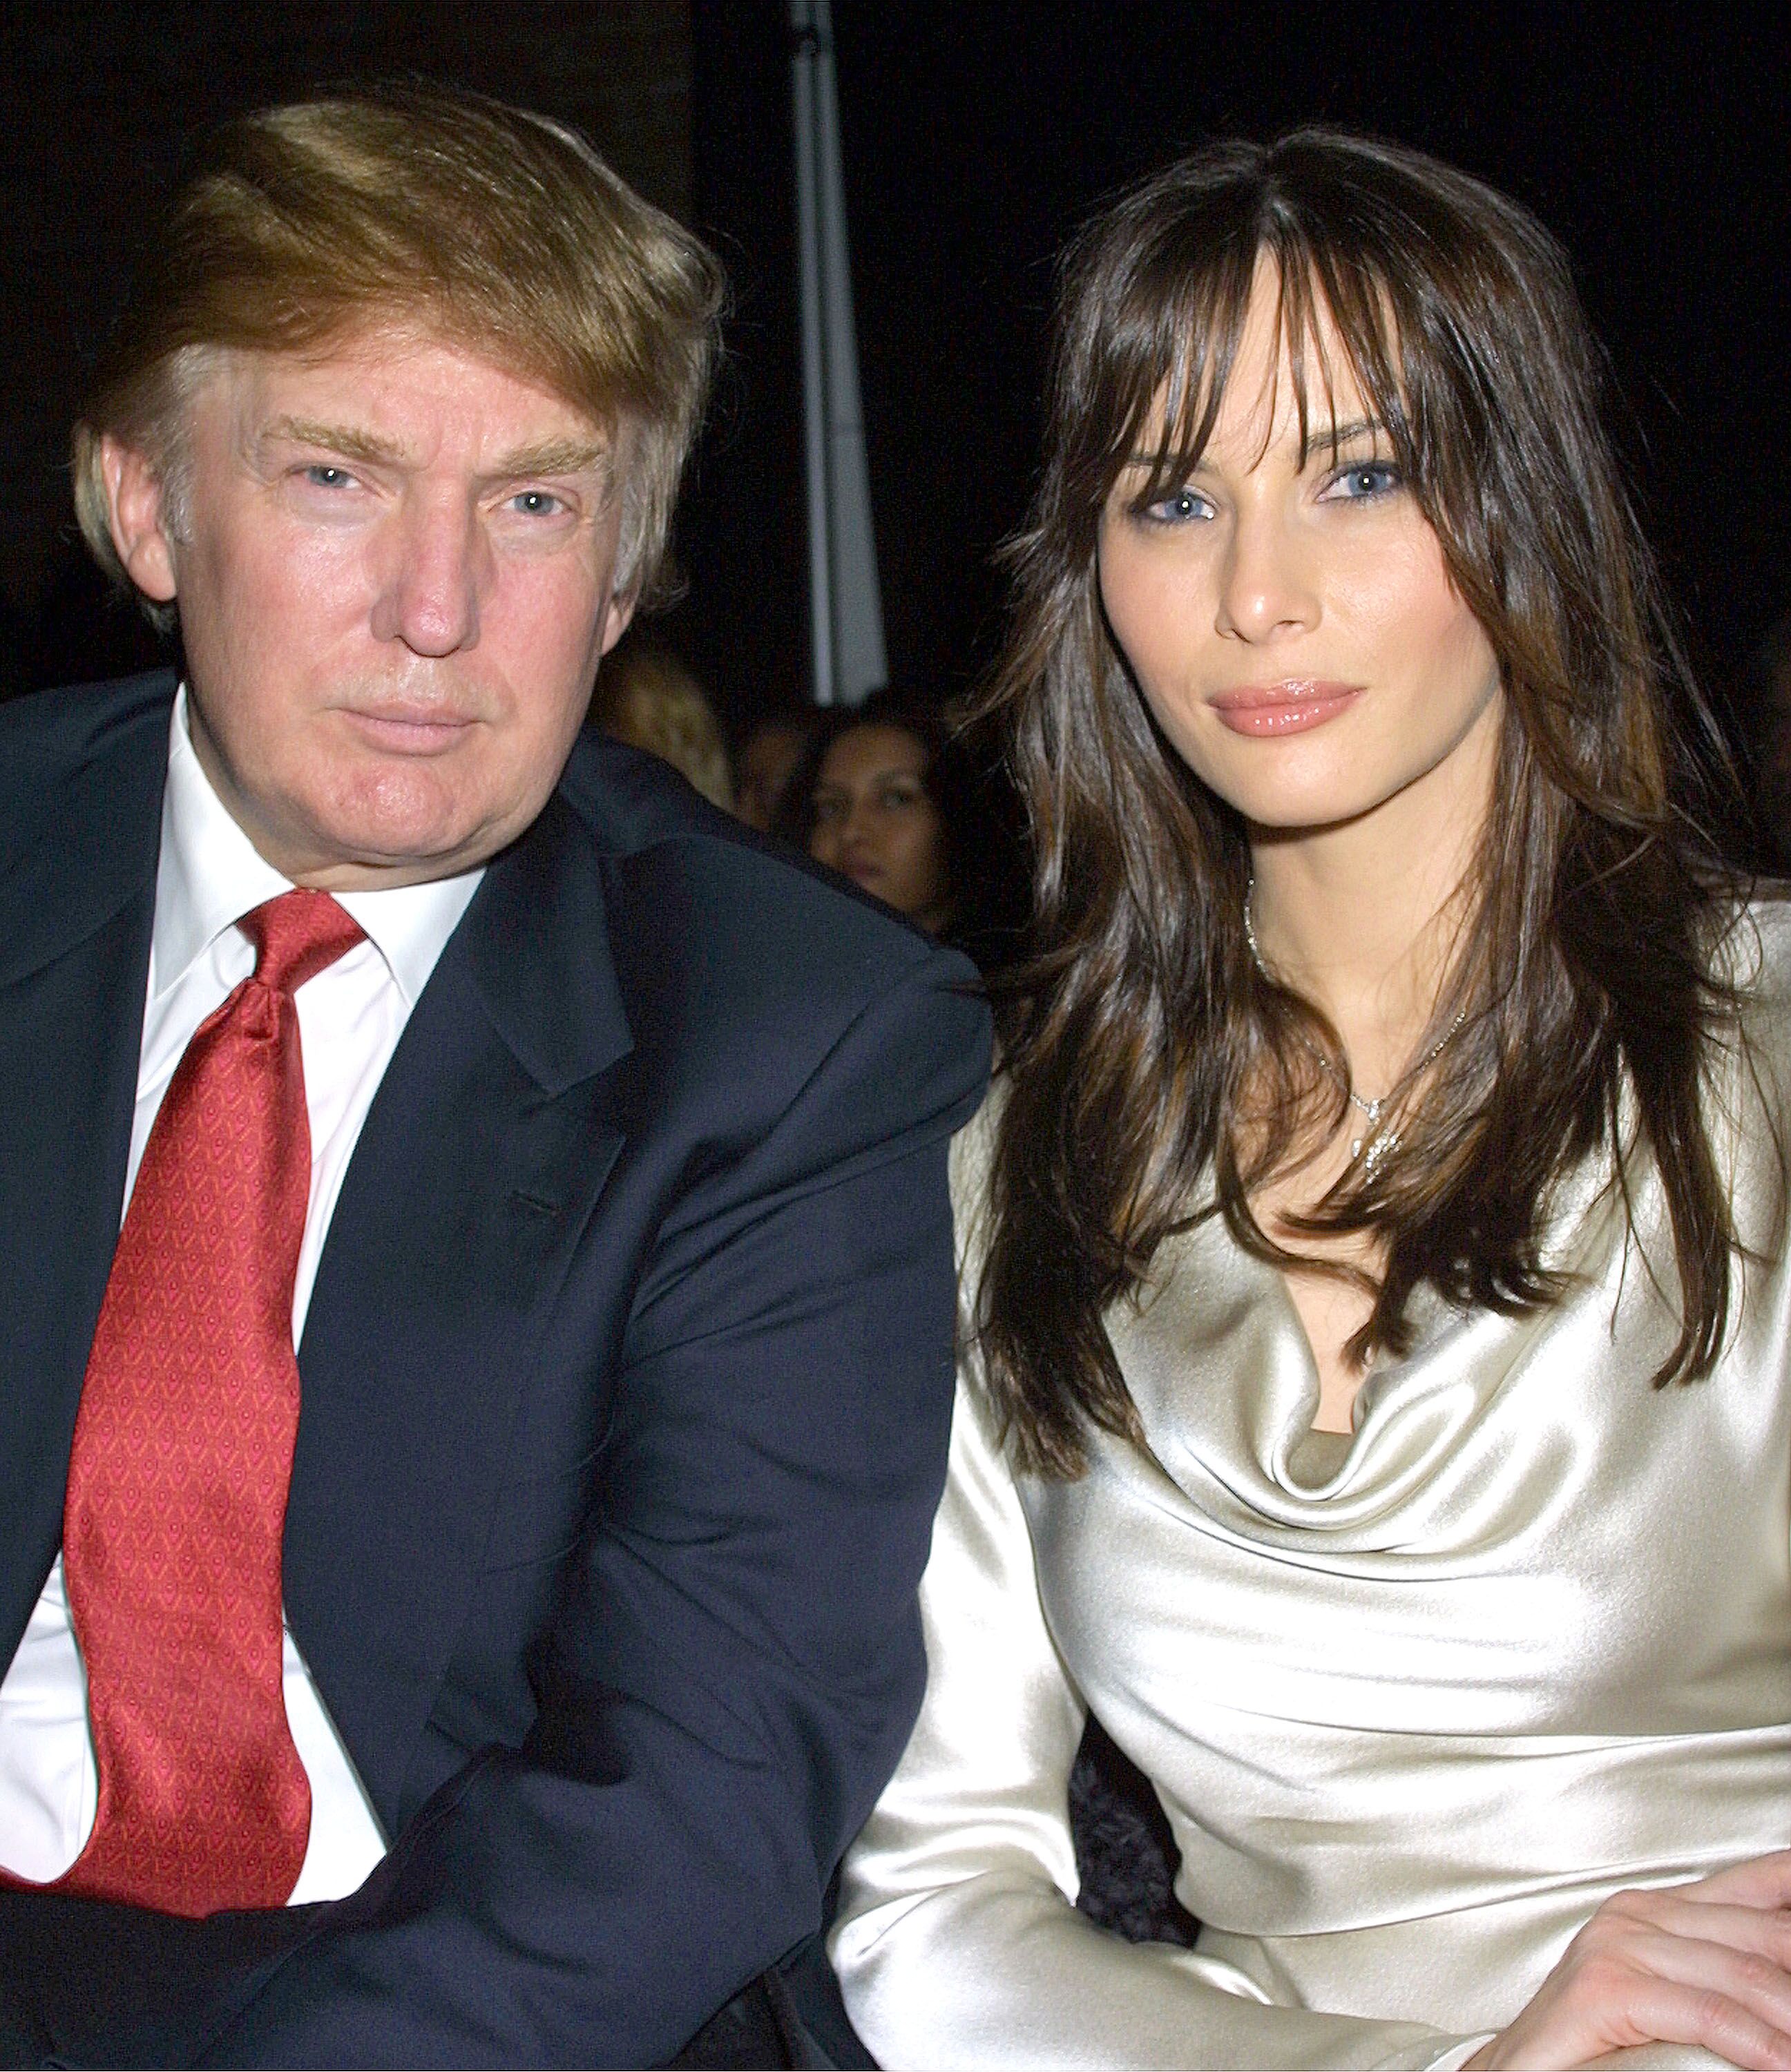 Melania Trump and Donald Trump at a red carpet event | Getty images / Global Images Ukraine